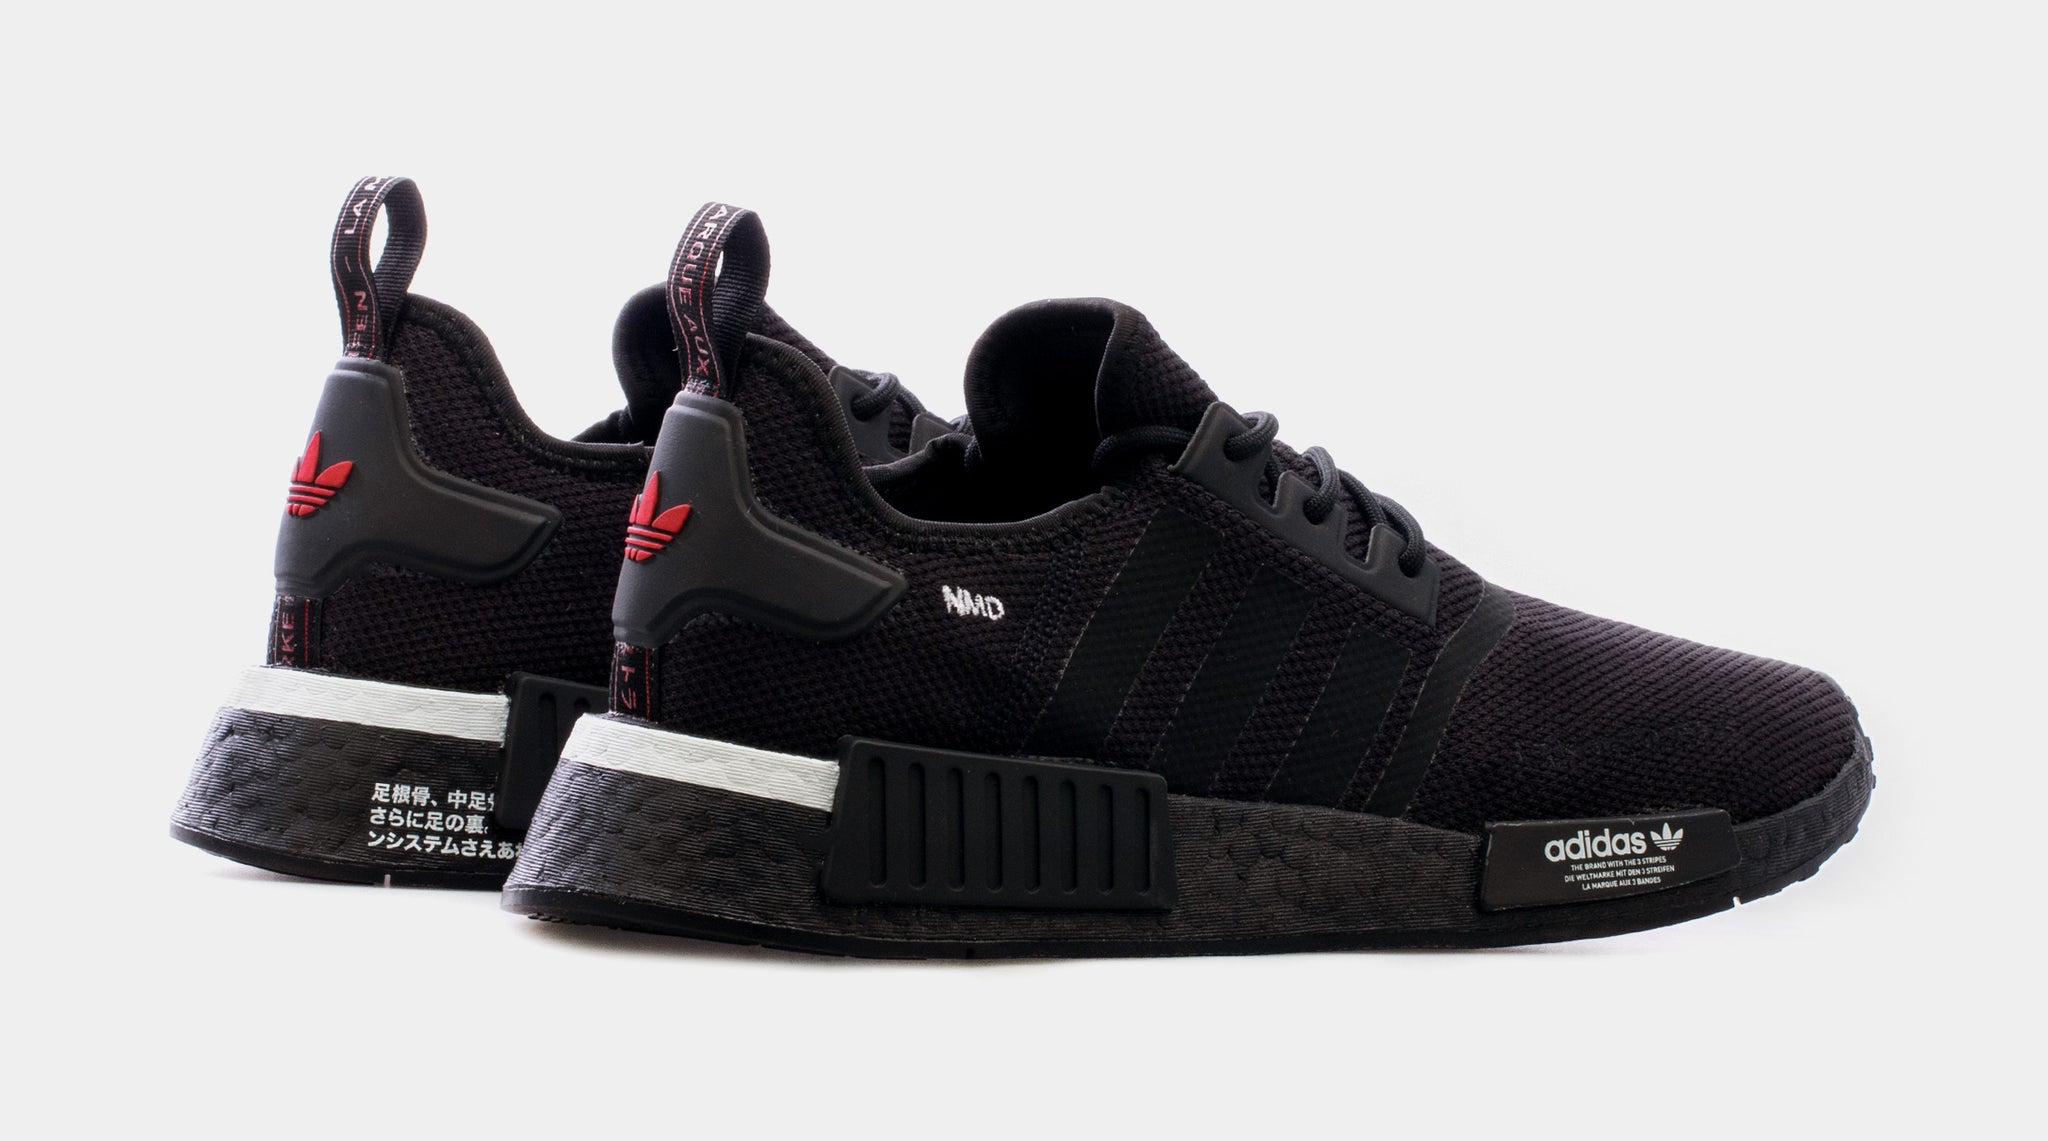 Adidas NMD_R1 Shoes - Men's - Core Black Red - 9.5